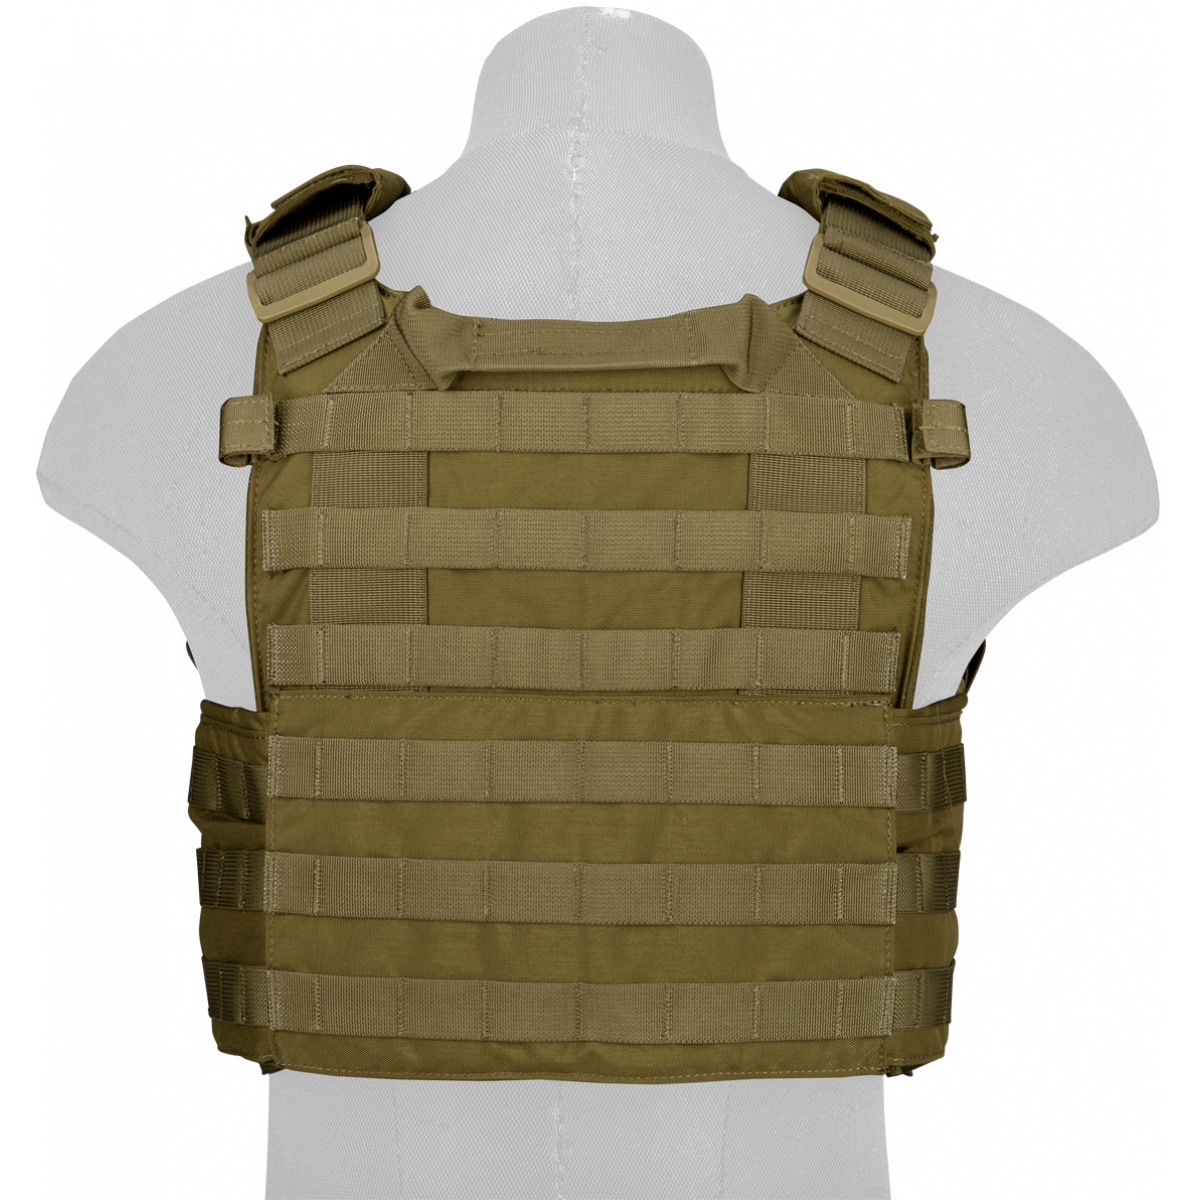 TMC Tactical LV Plate Carrier Styling Vest Khaki for Tactical